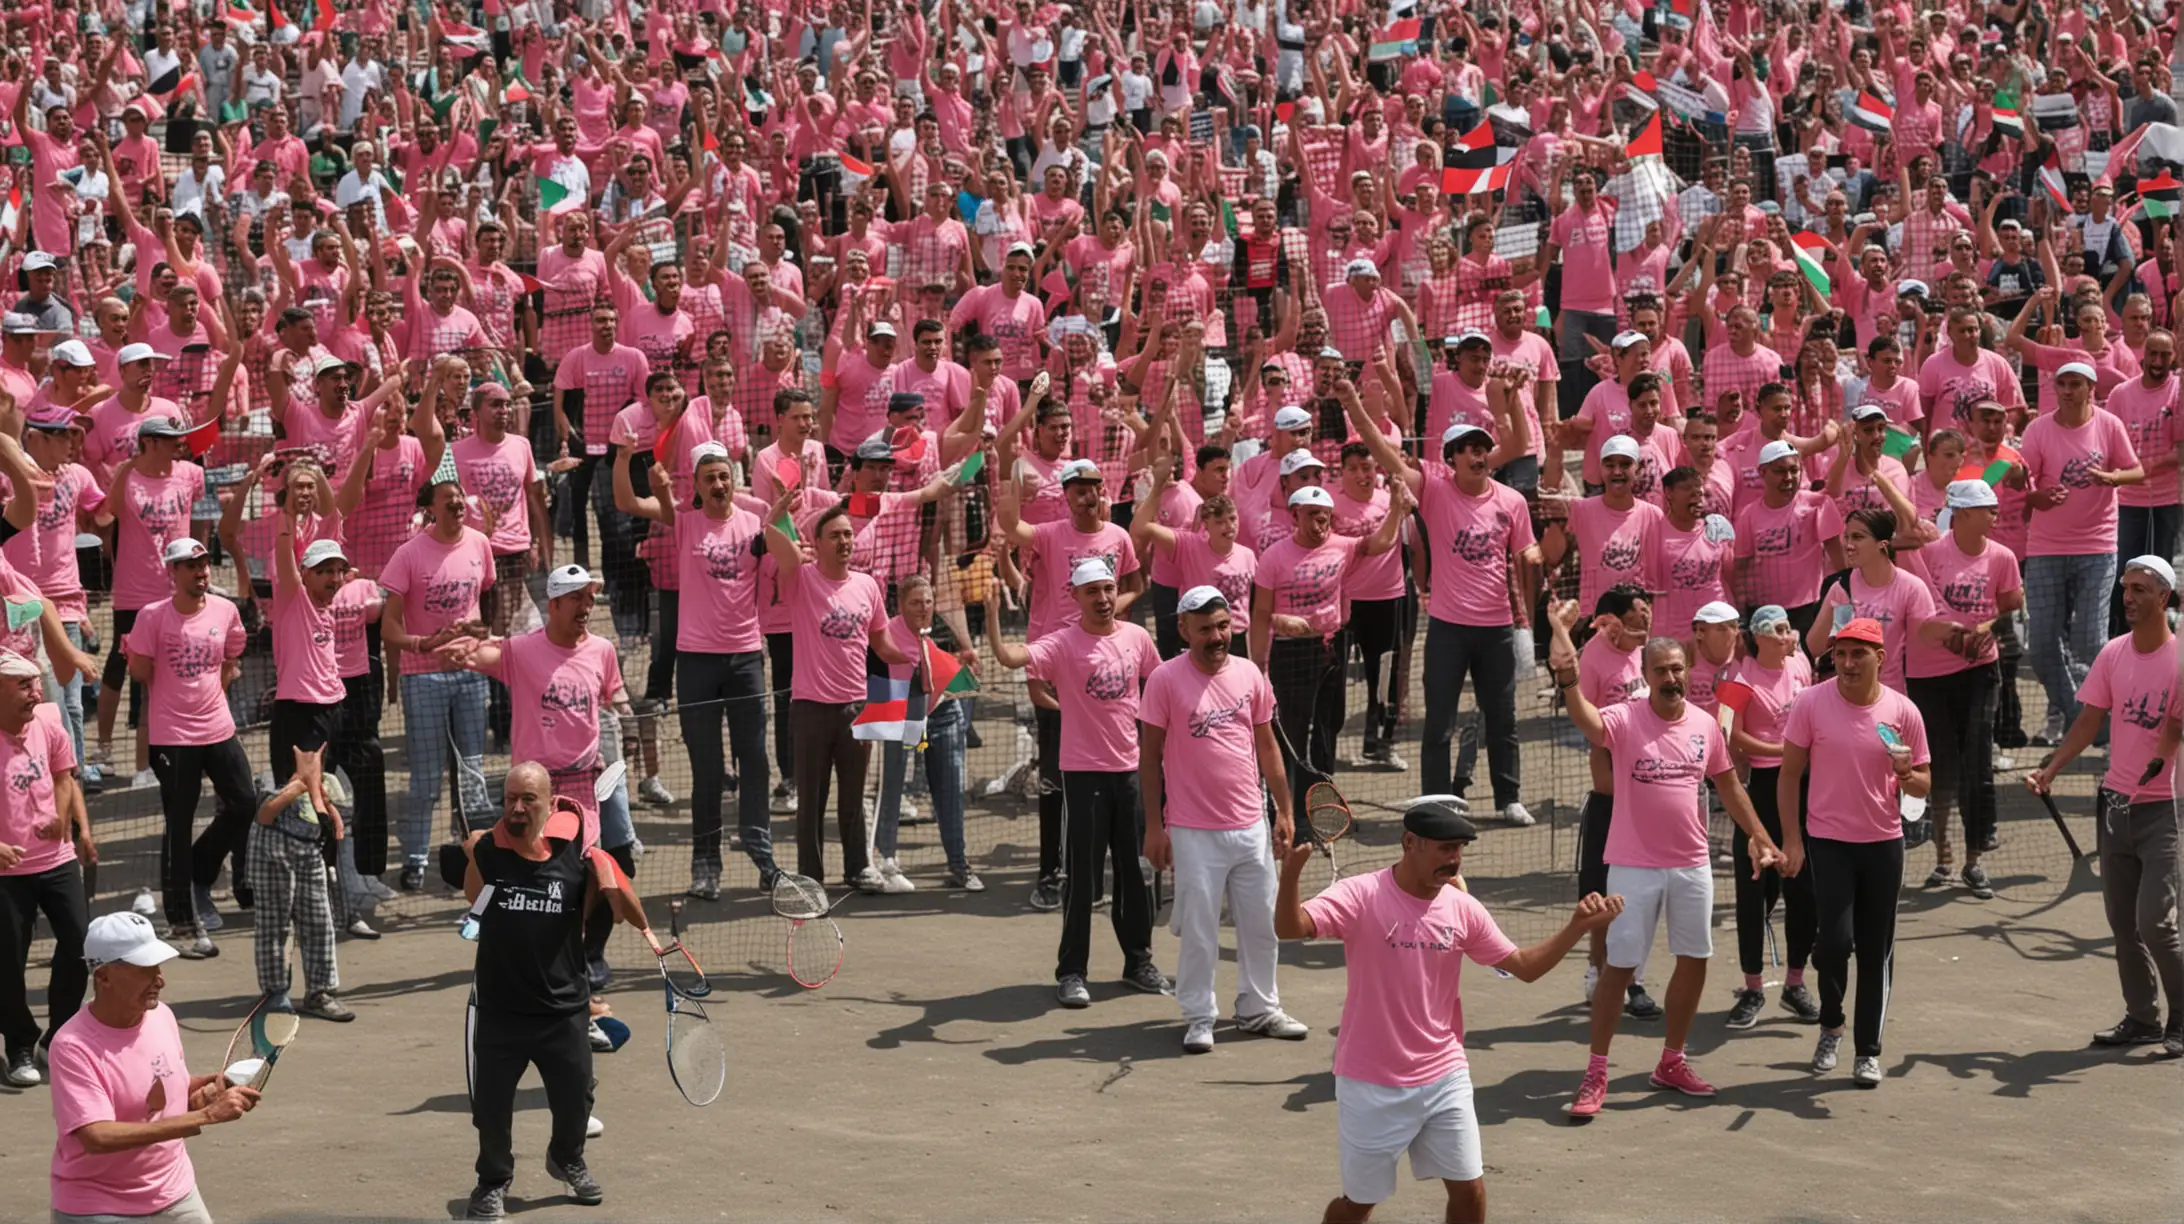 lot of palestinians with tennis rackets, in pink t-shirts, dancing, with palestinian, USA, nazi german flags